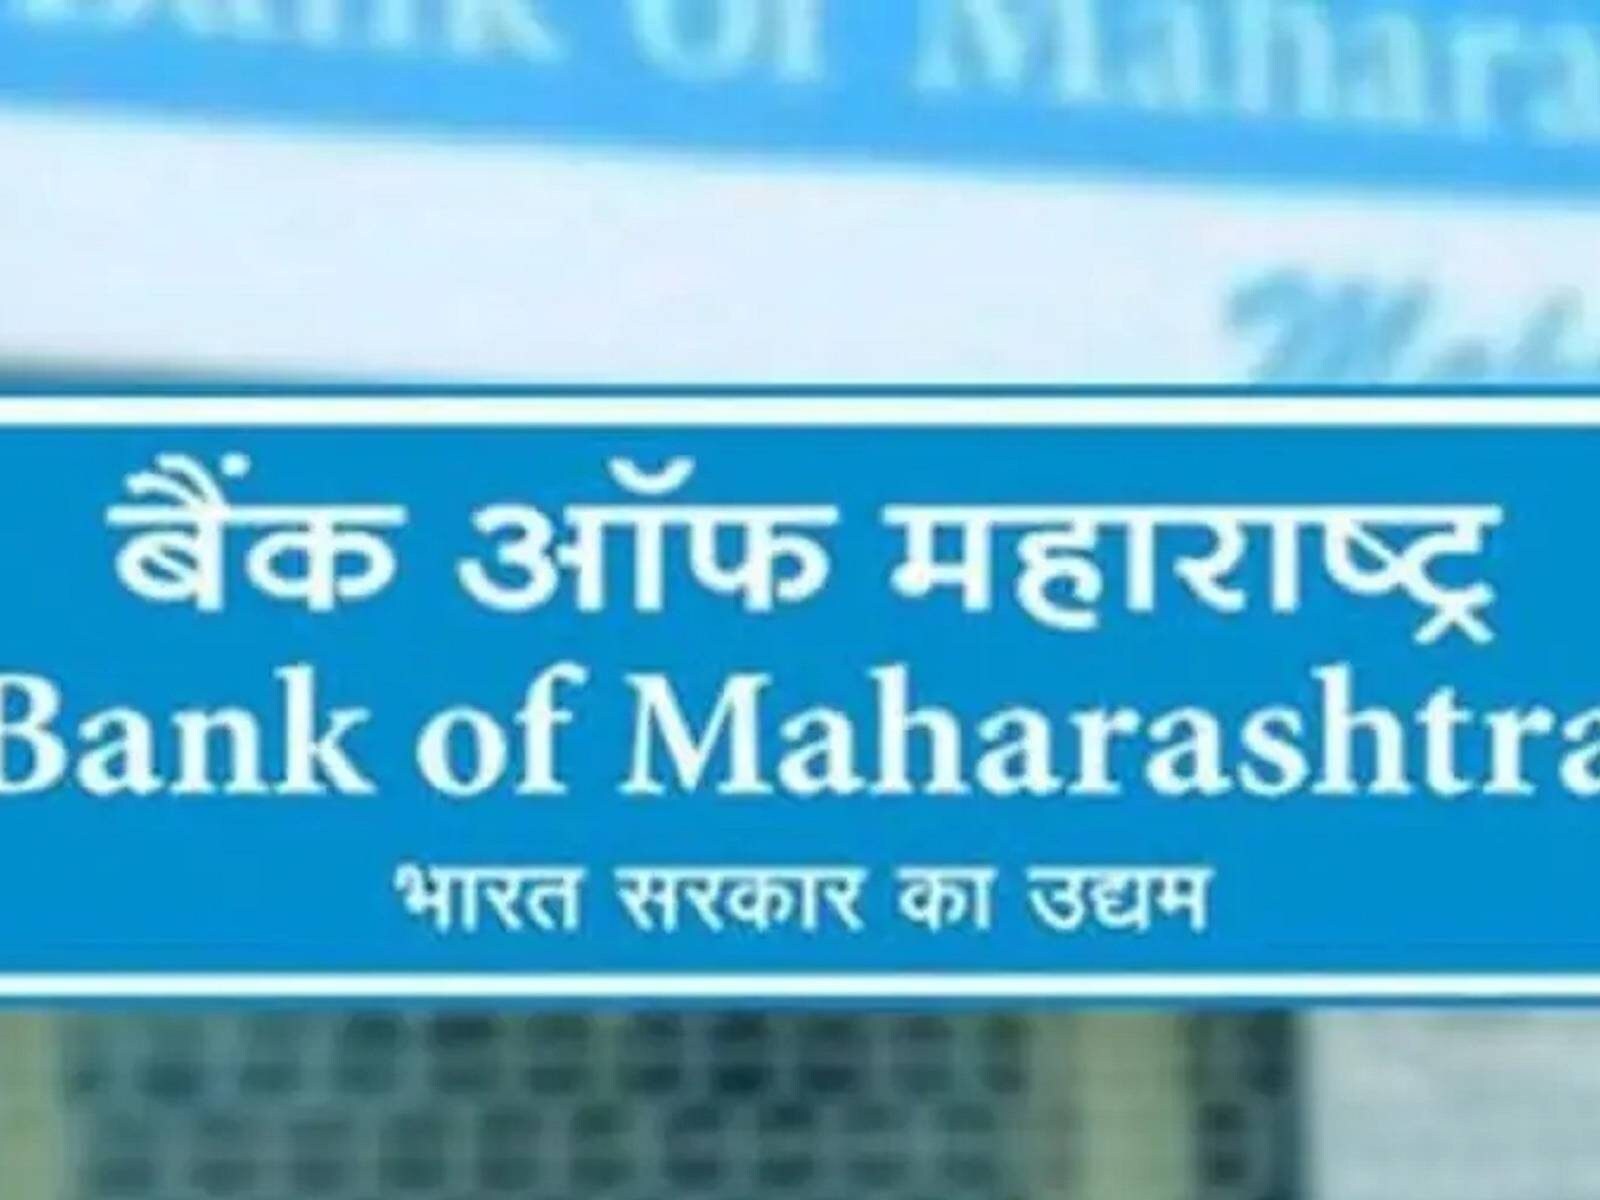 Bank of Maharashtra - Bank of Maharashtra celebrates 88th Foundation Day,  taking pride in serving the needs of the valued patrons for decades with a  wide assortment of services. Mahabank thanks all